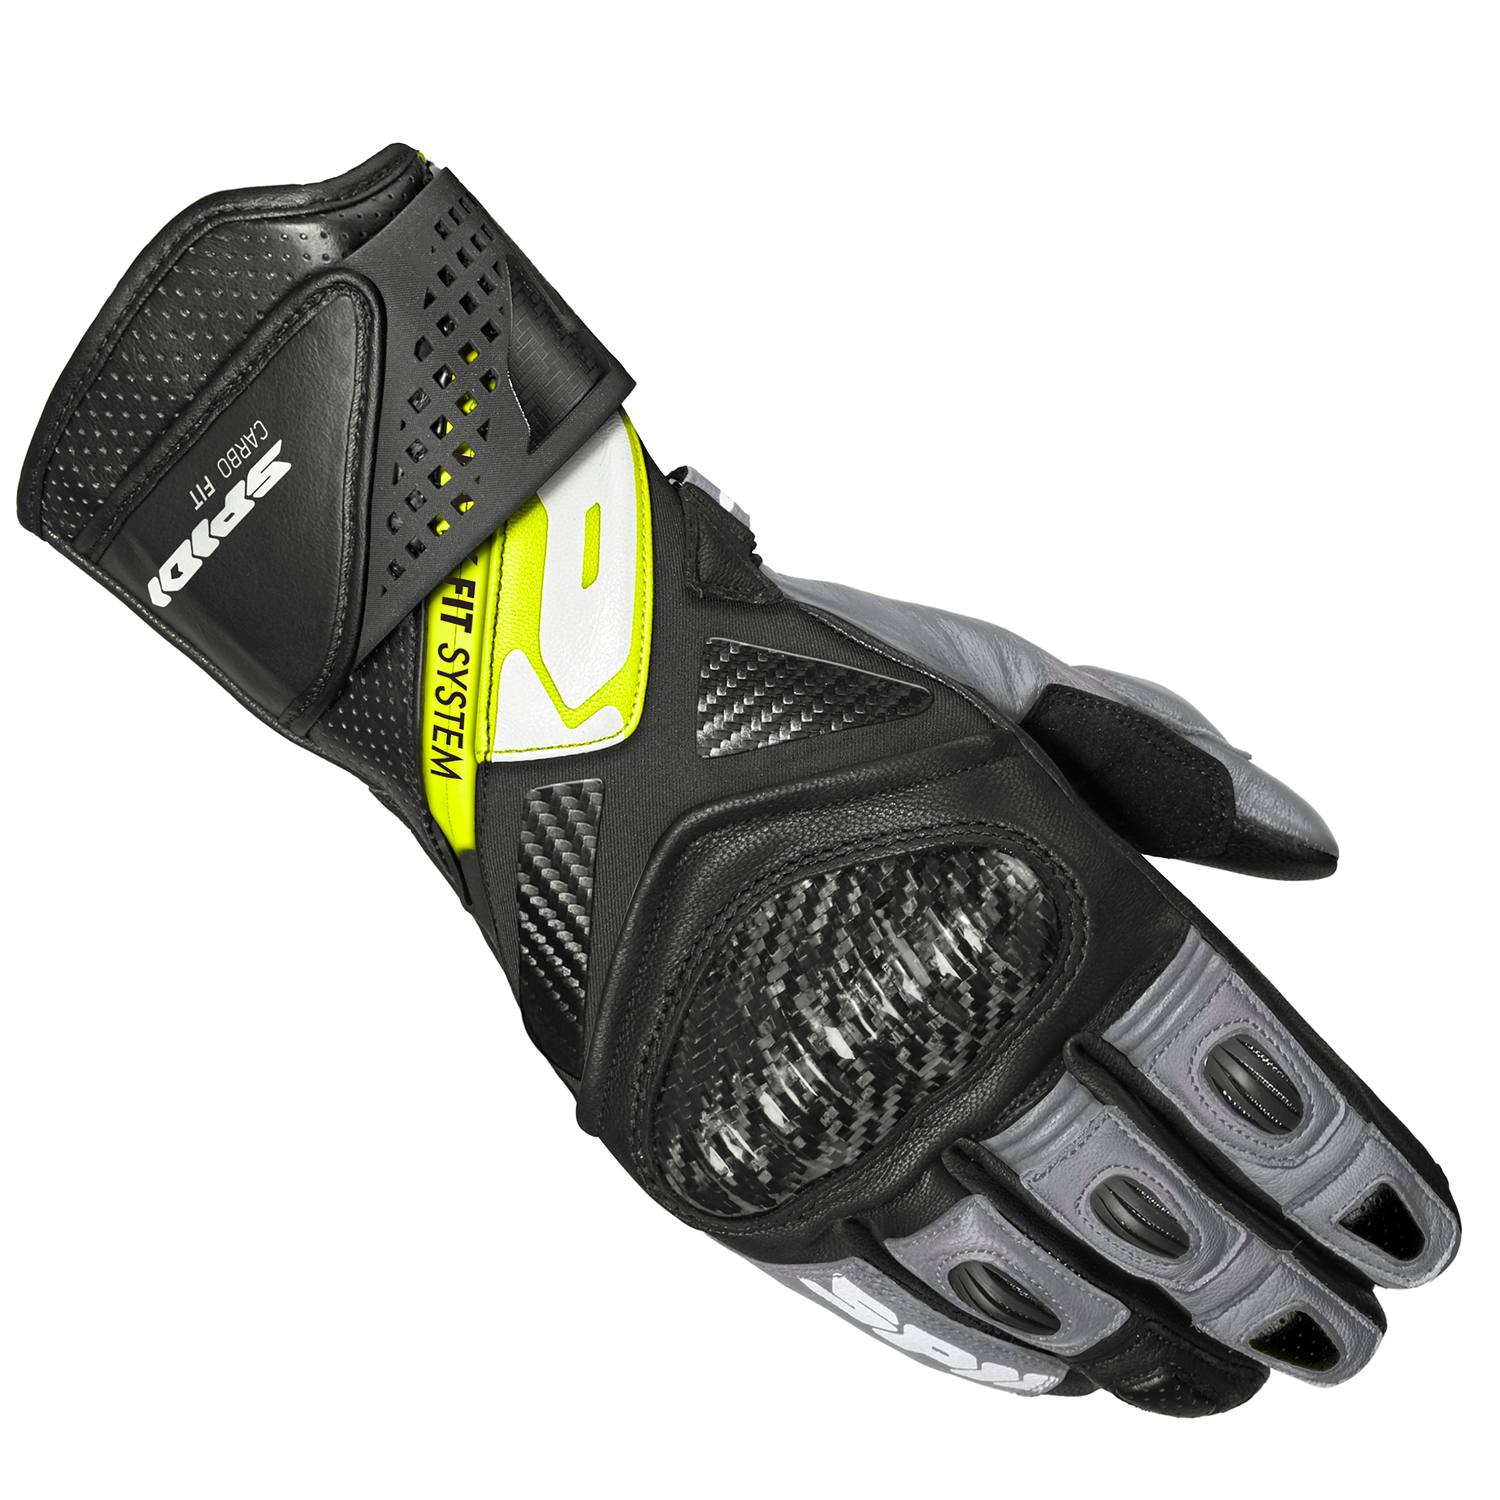 Image of EU Spidi Carbo Fit Gloves Black Fluorescente Yellow Taille XL